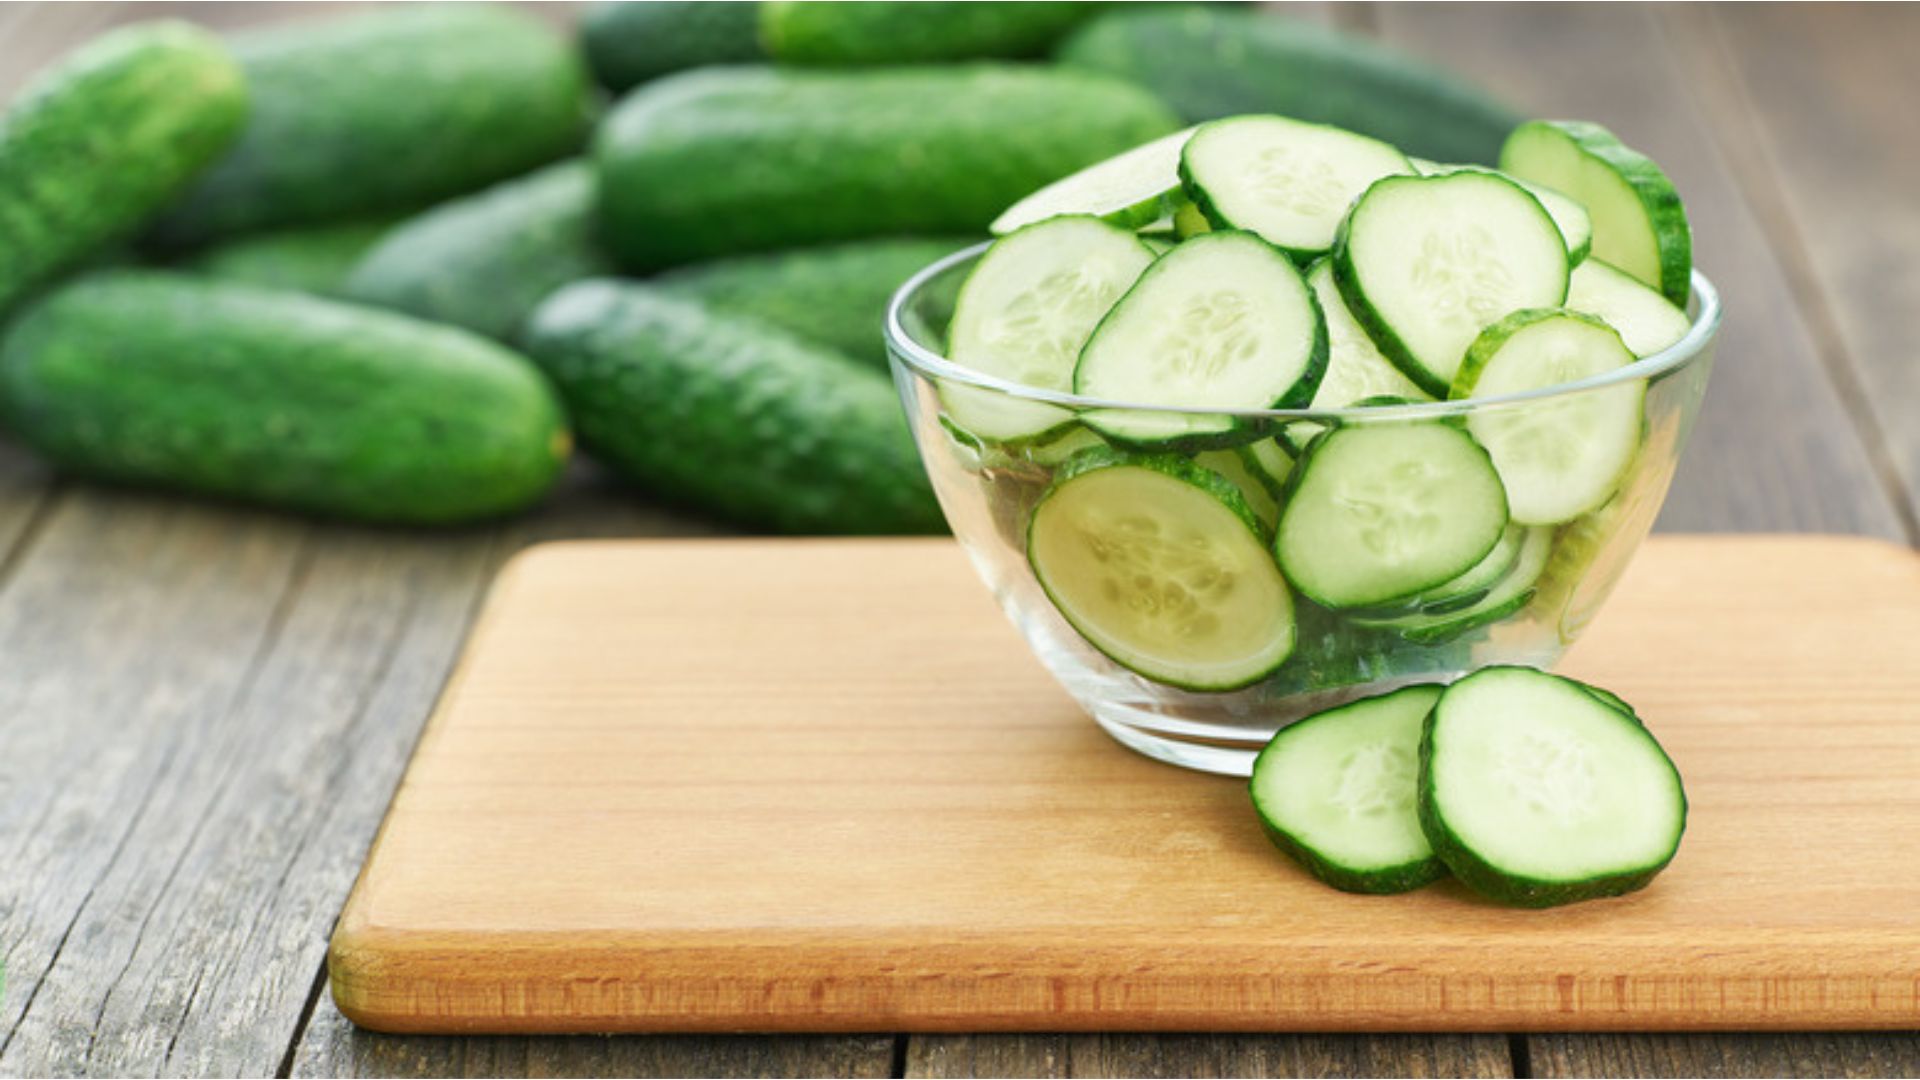 The Best Way To Tell If Cucumber Has Gone Bad